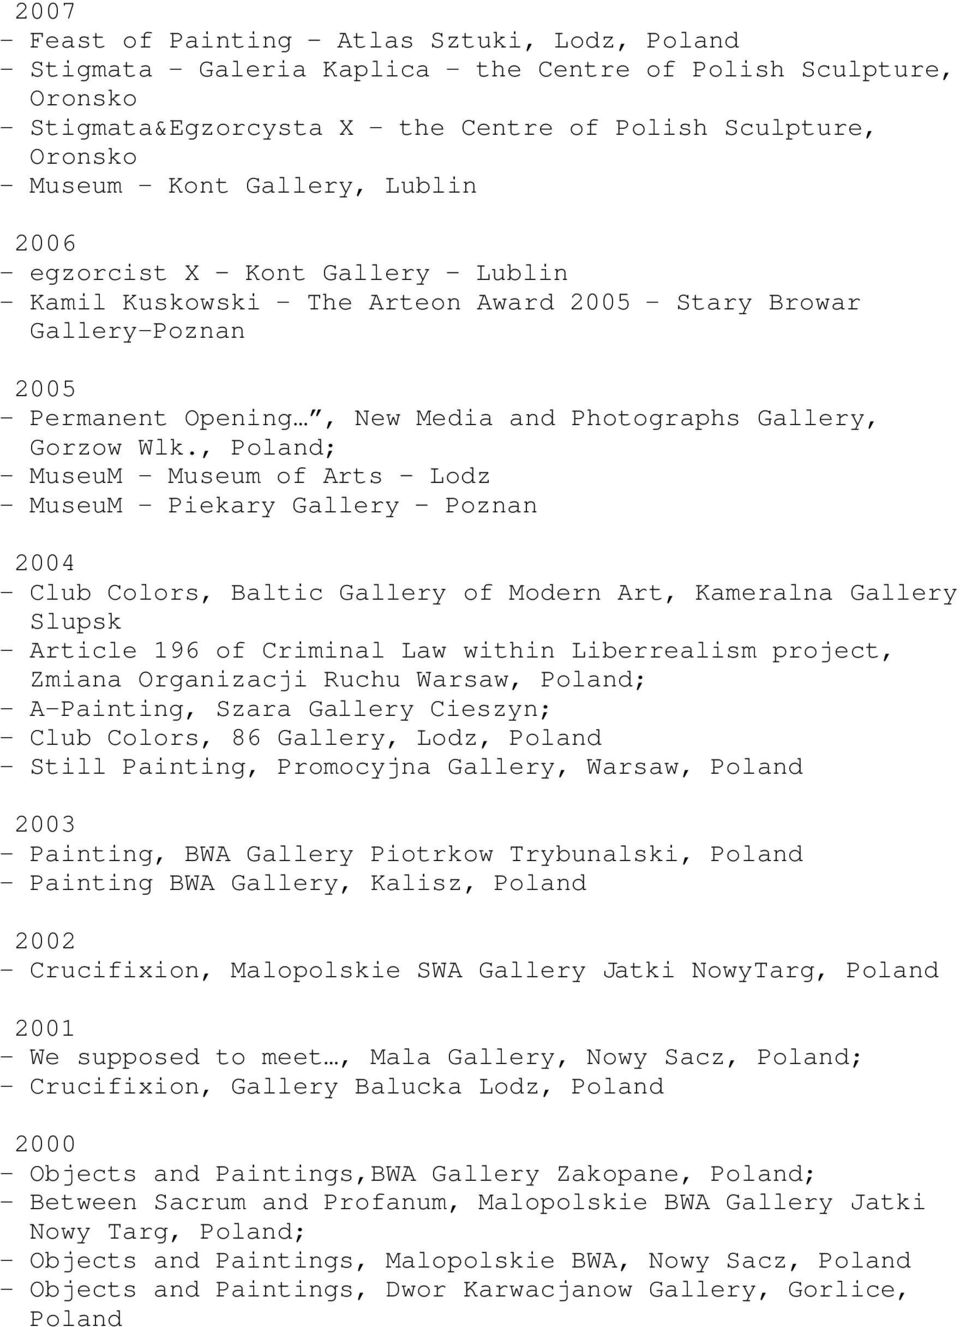 , ; - MuseuM - Museum of Arts Lodz - MuseuM - Piekary Gallery Poznan 2004 - Club Colors, Baltic Gallery of Modern Art, Kameralna Gallery Slupsk - Article 196 of Criminal Law within Liberrealism